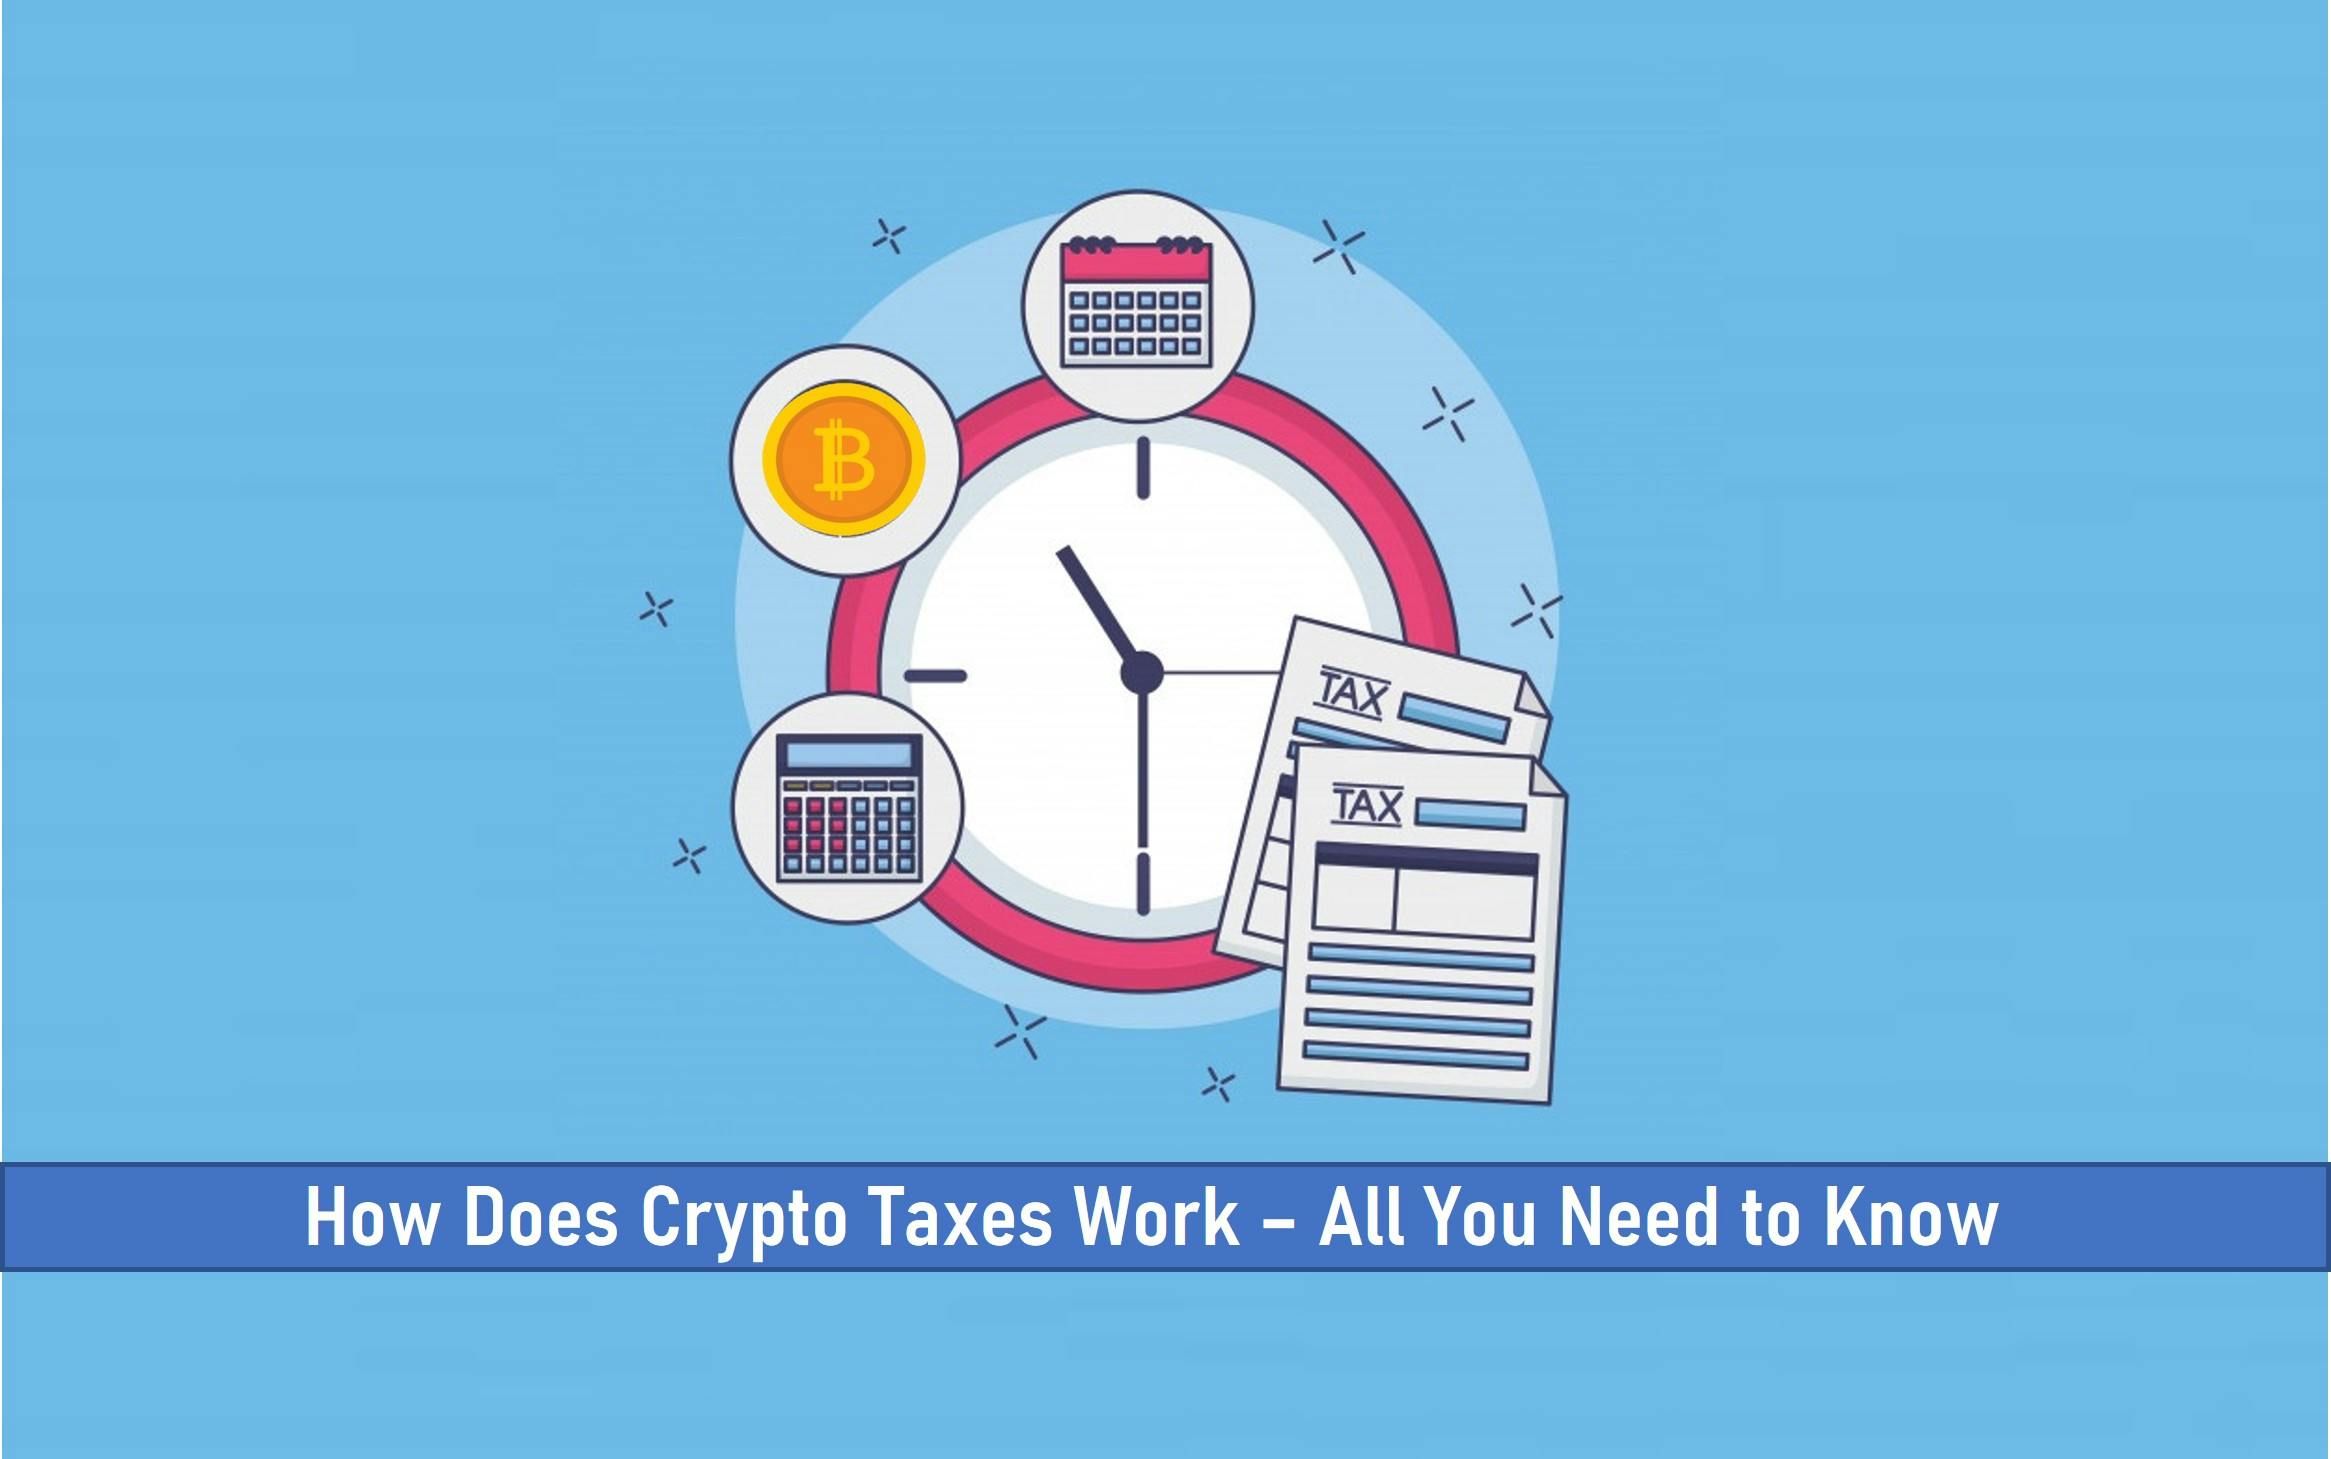 How Does Crypto Taxes Work (All You Need to Know)